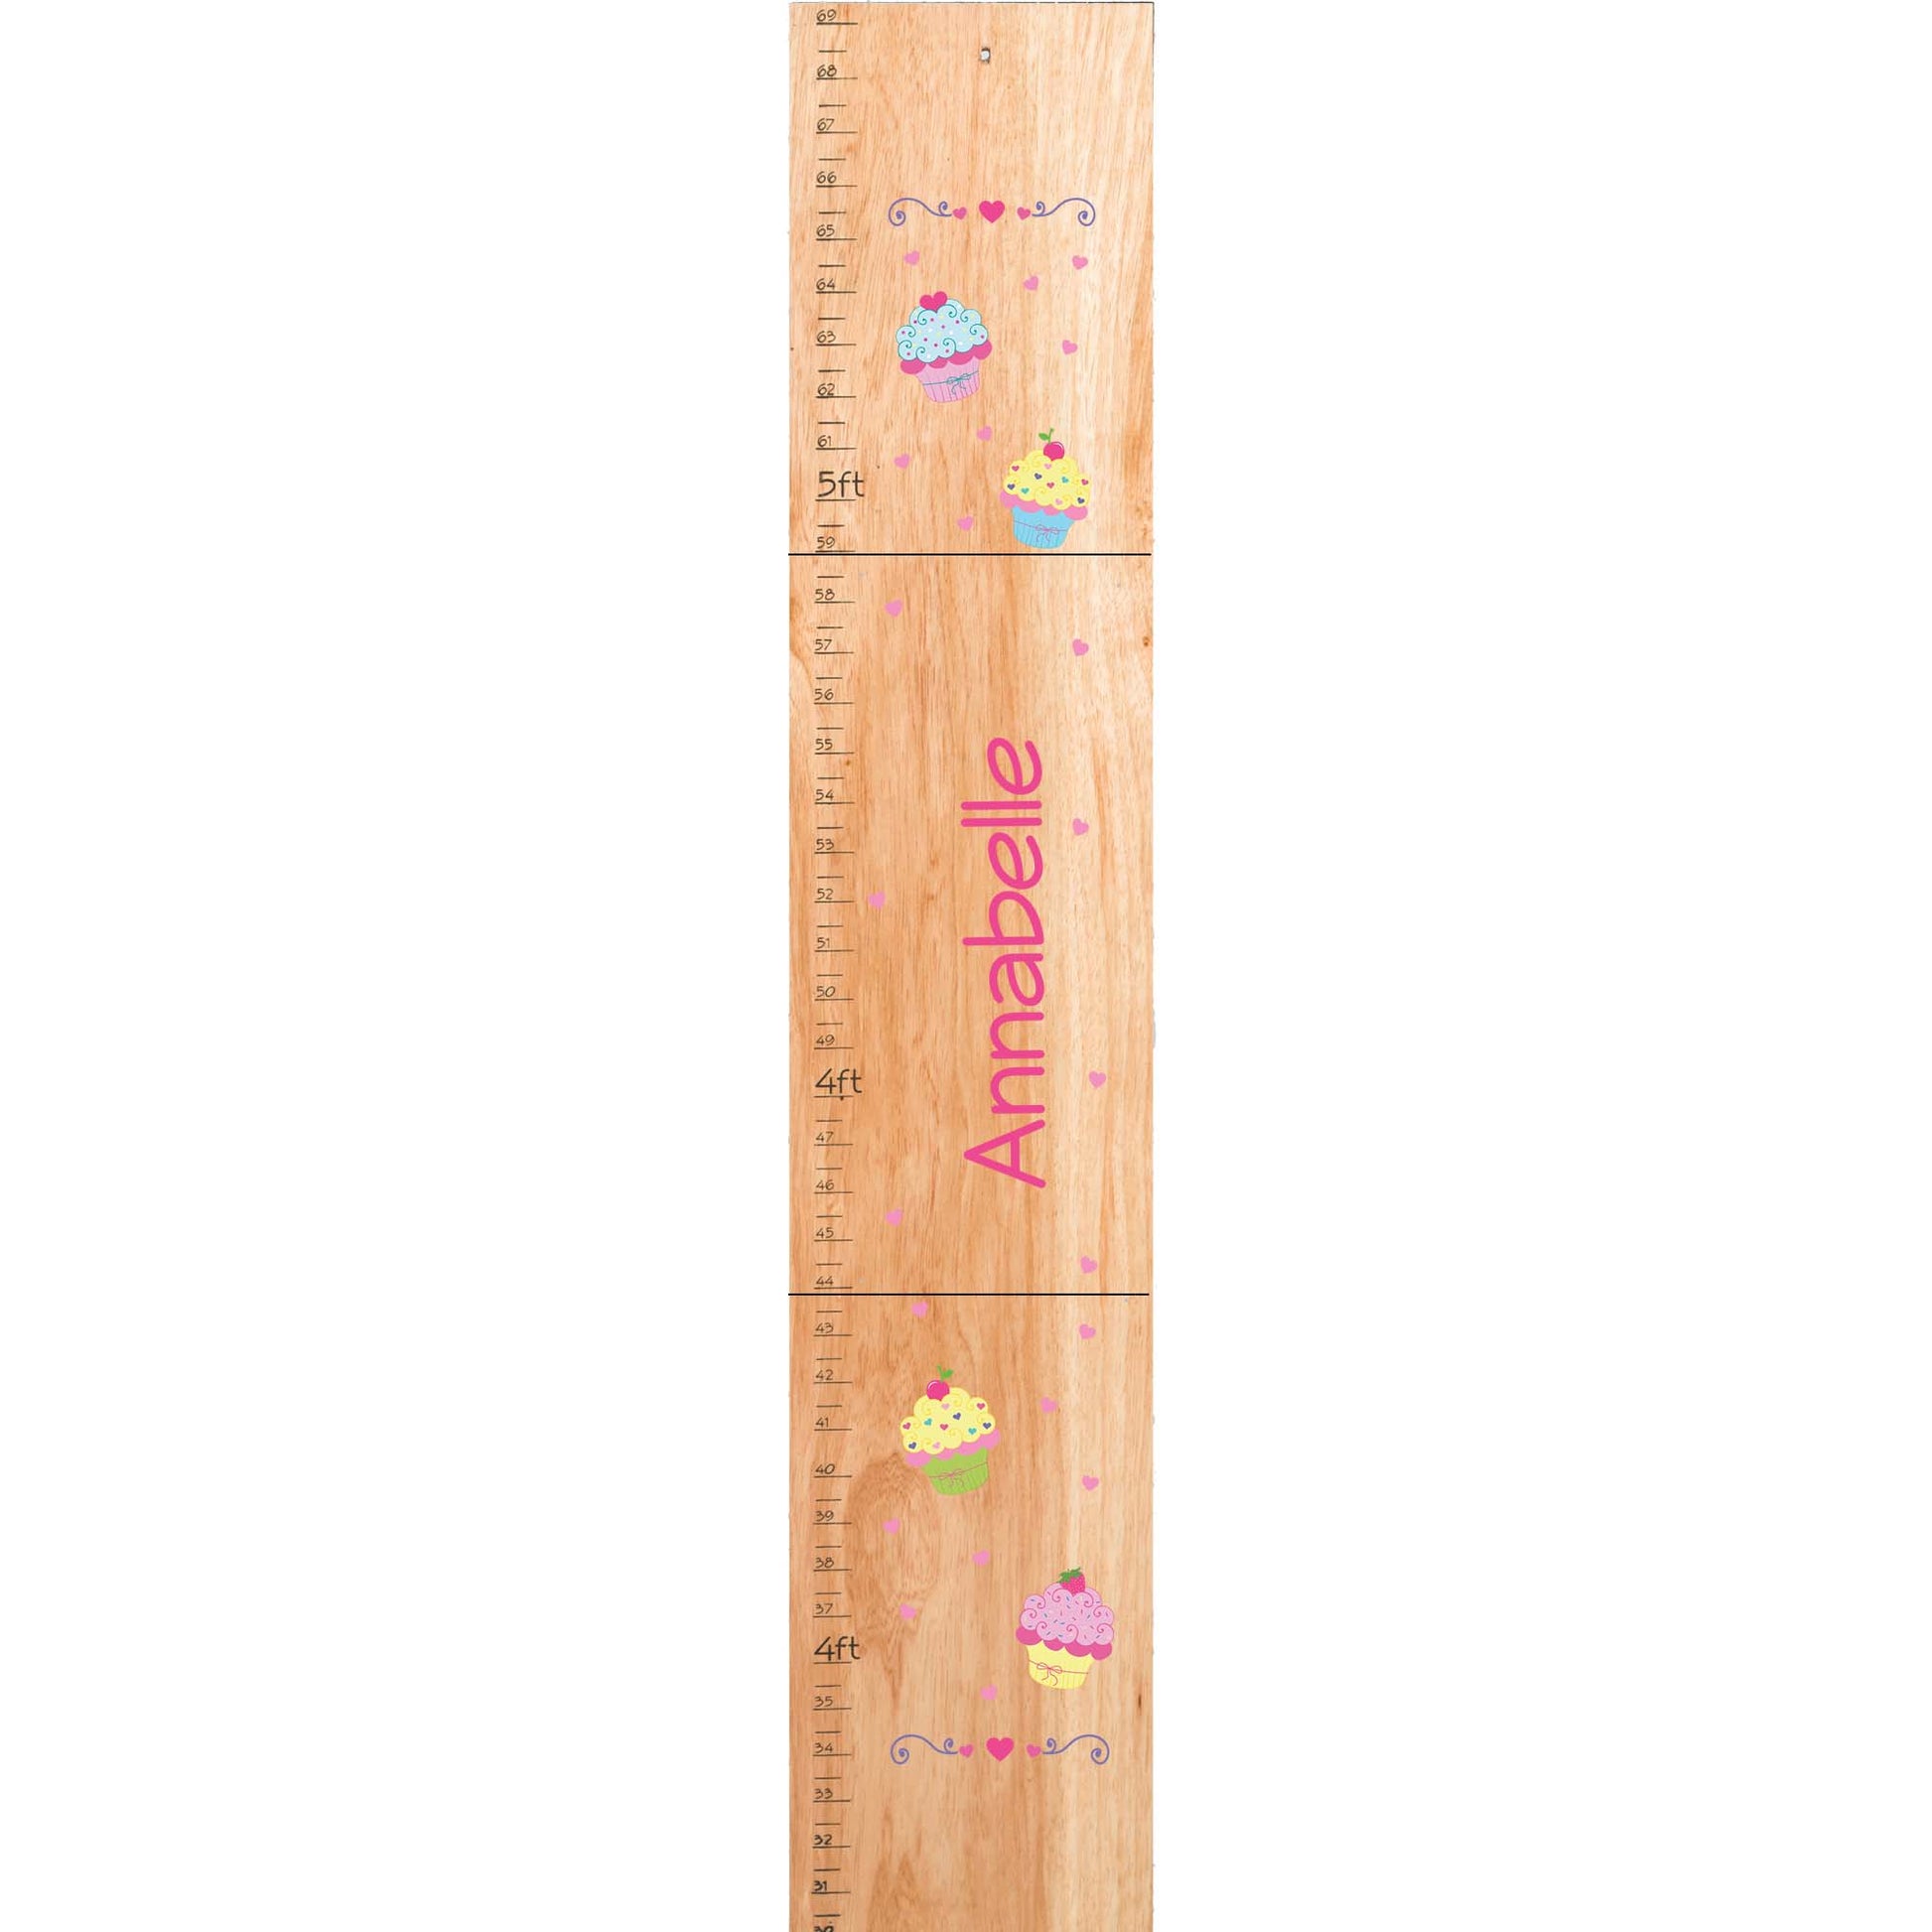 Personalized Natural Growth Chart With Garland Pink Mint Blush Design